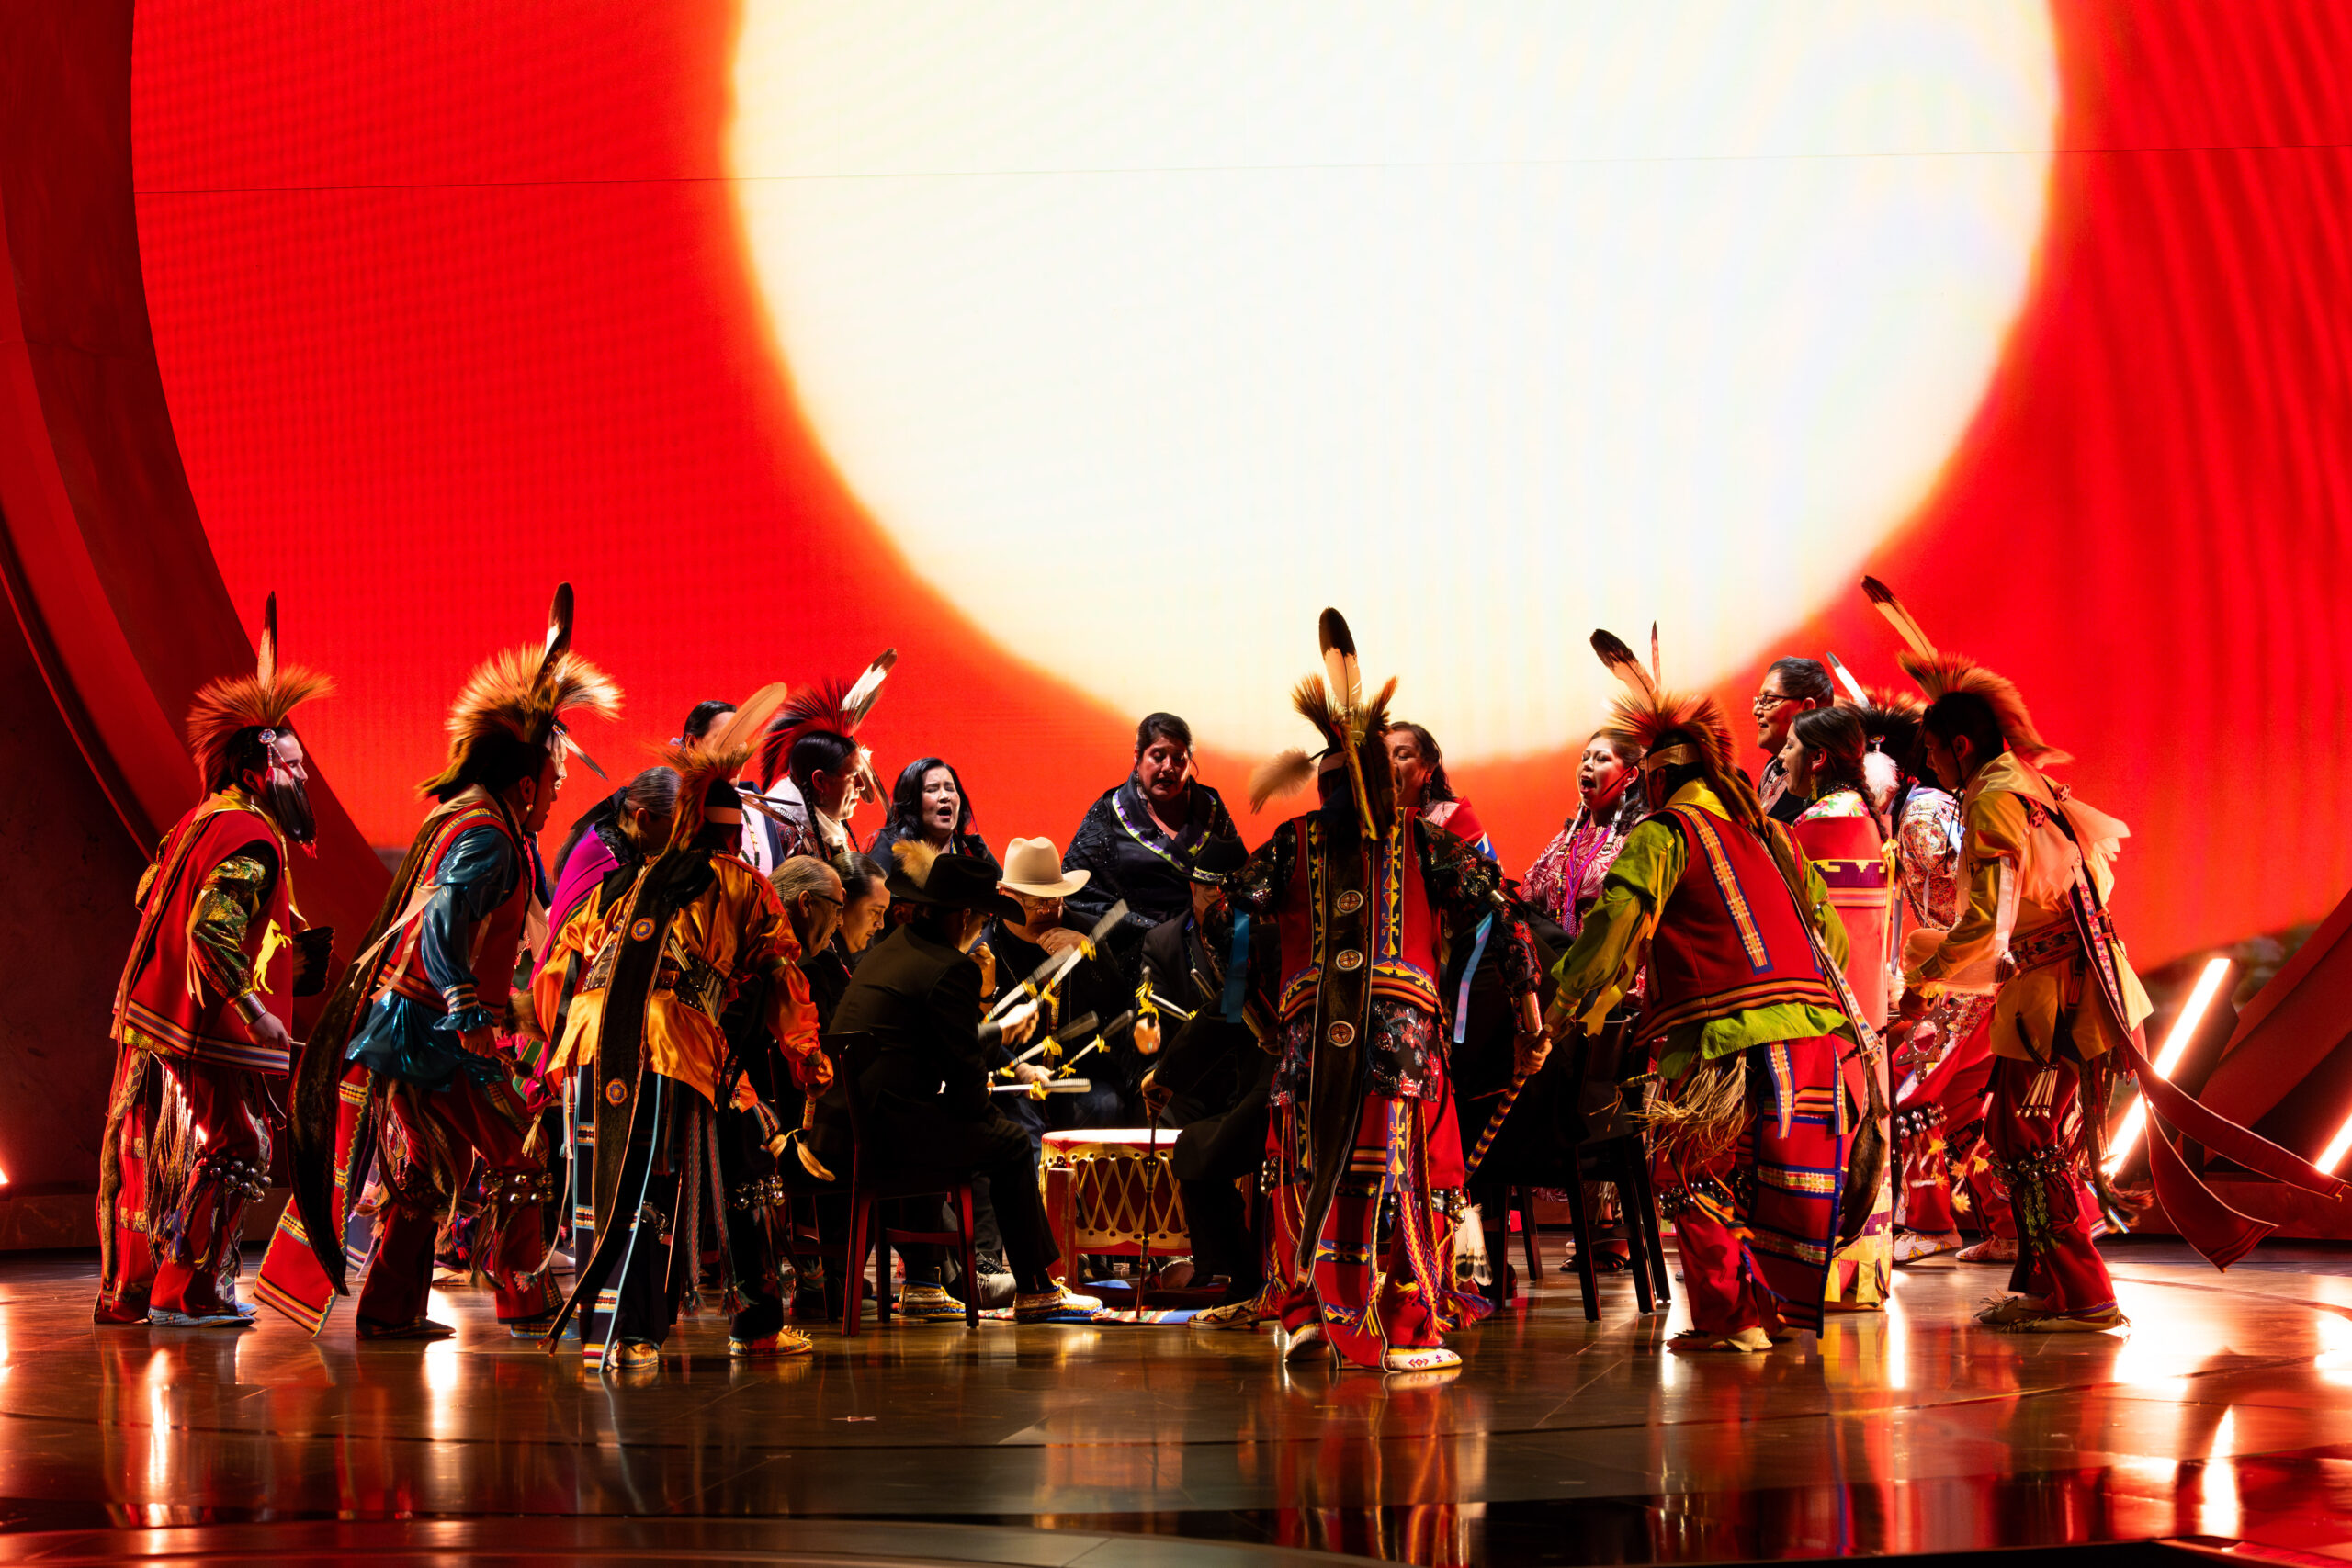 The Osage Tribal Singers and Dancers perform onstage during the Oscars.